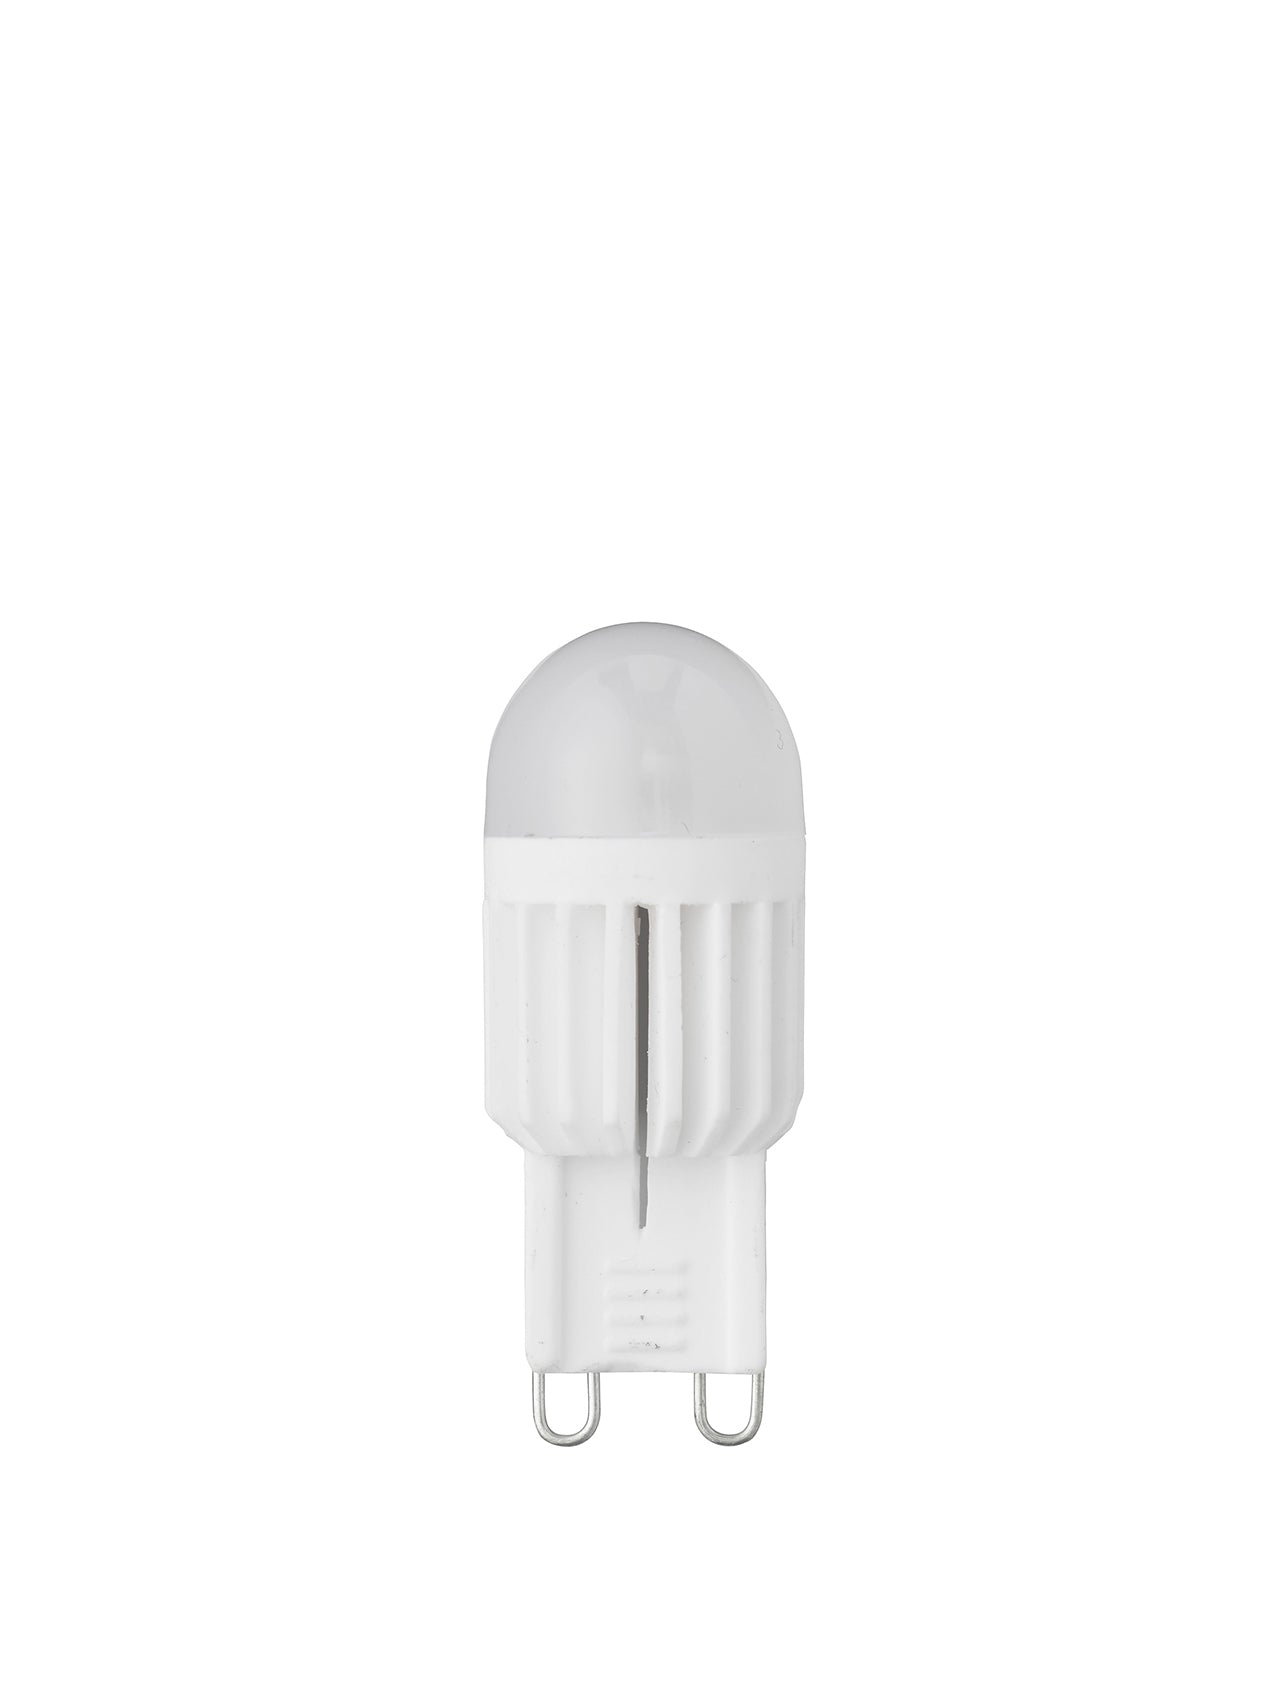 Dimmable G9 LED Bulb - Compatible w/ Cast lighting